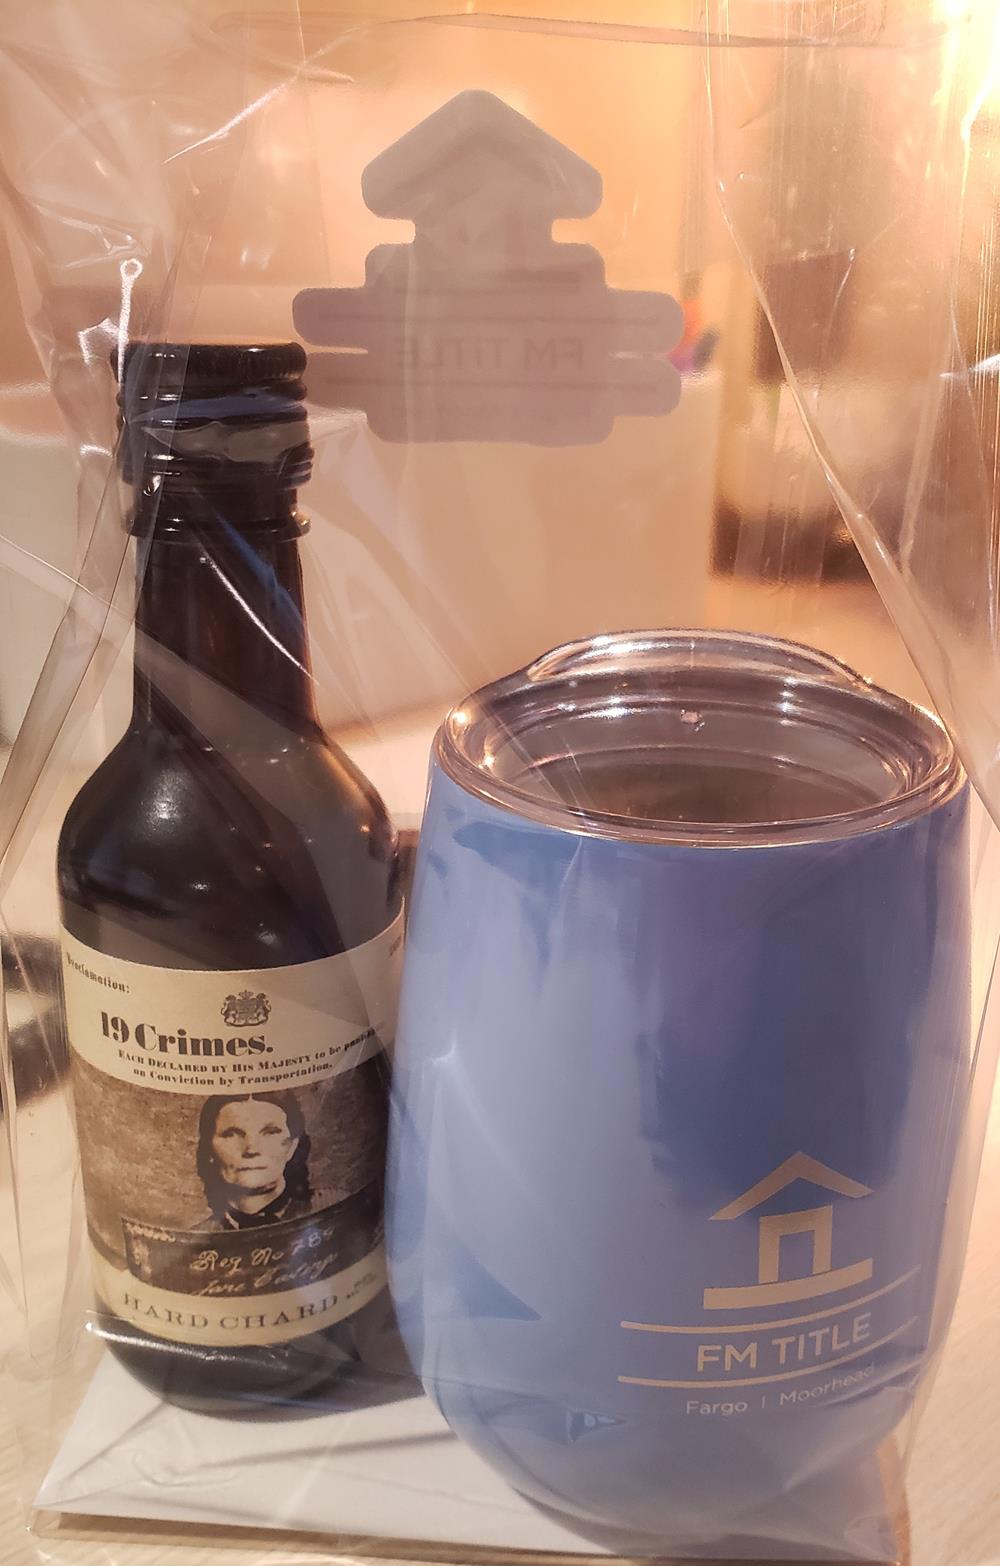 a bottle and a mug in a plastic bag